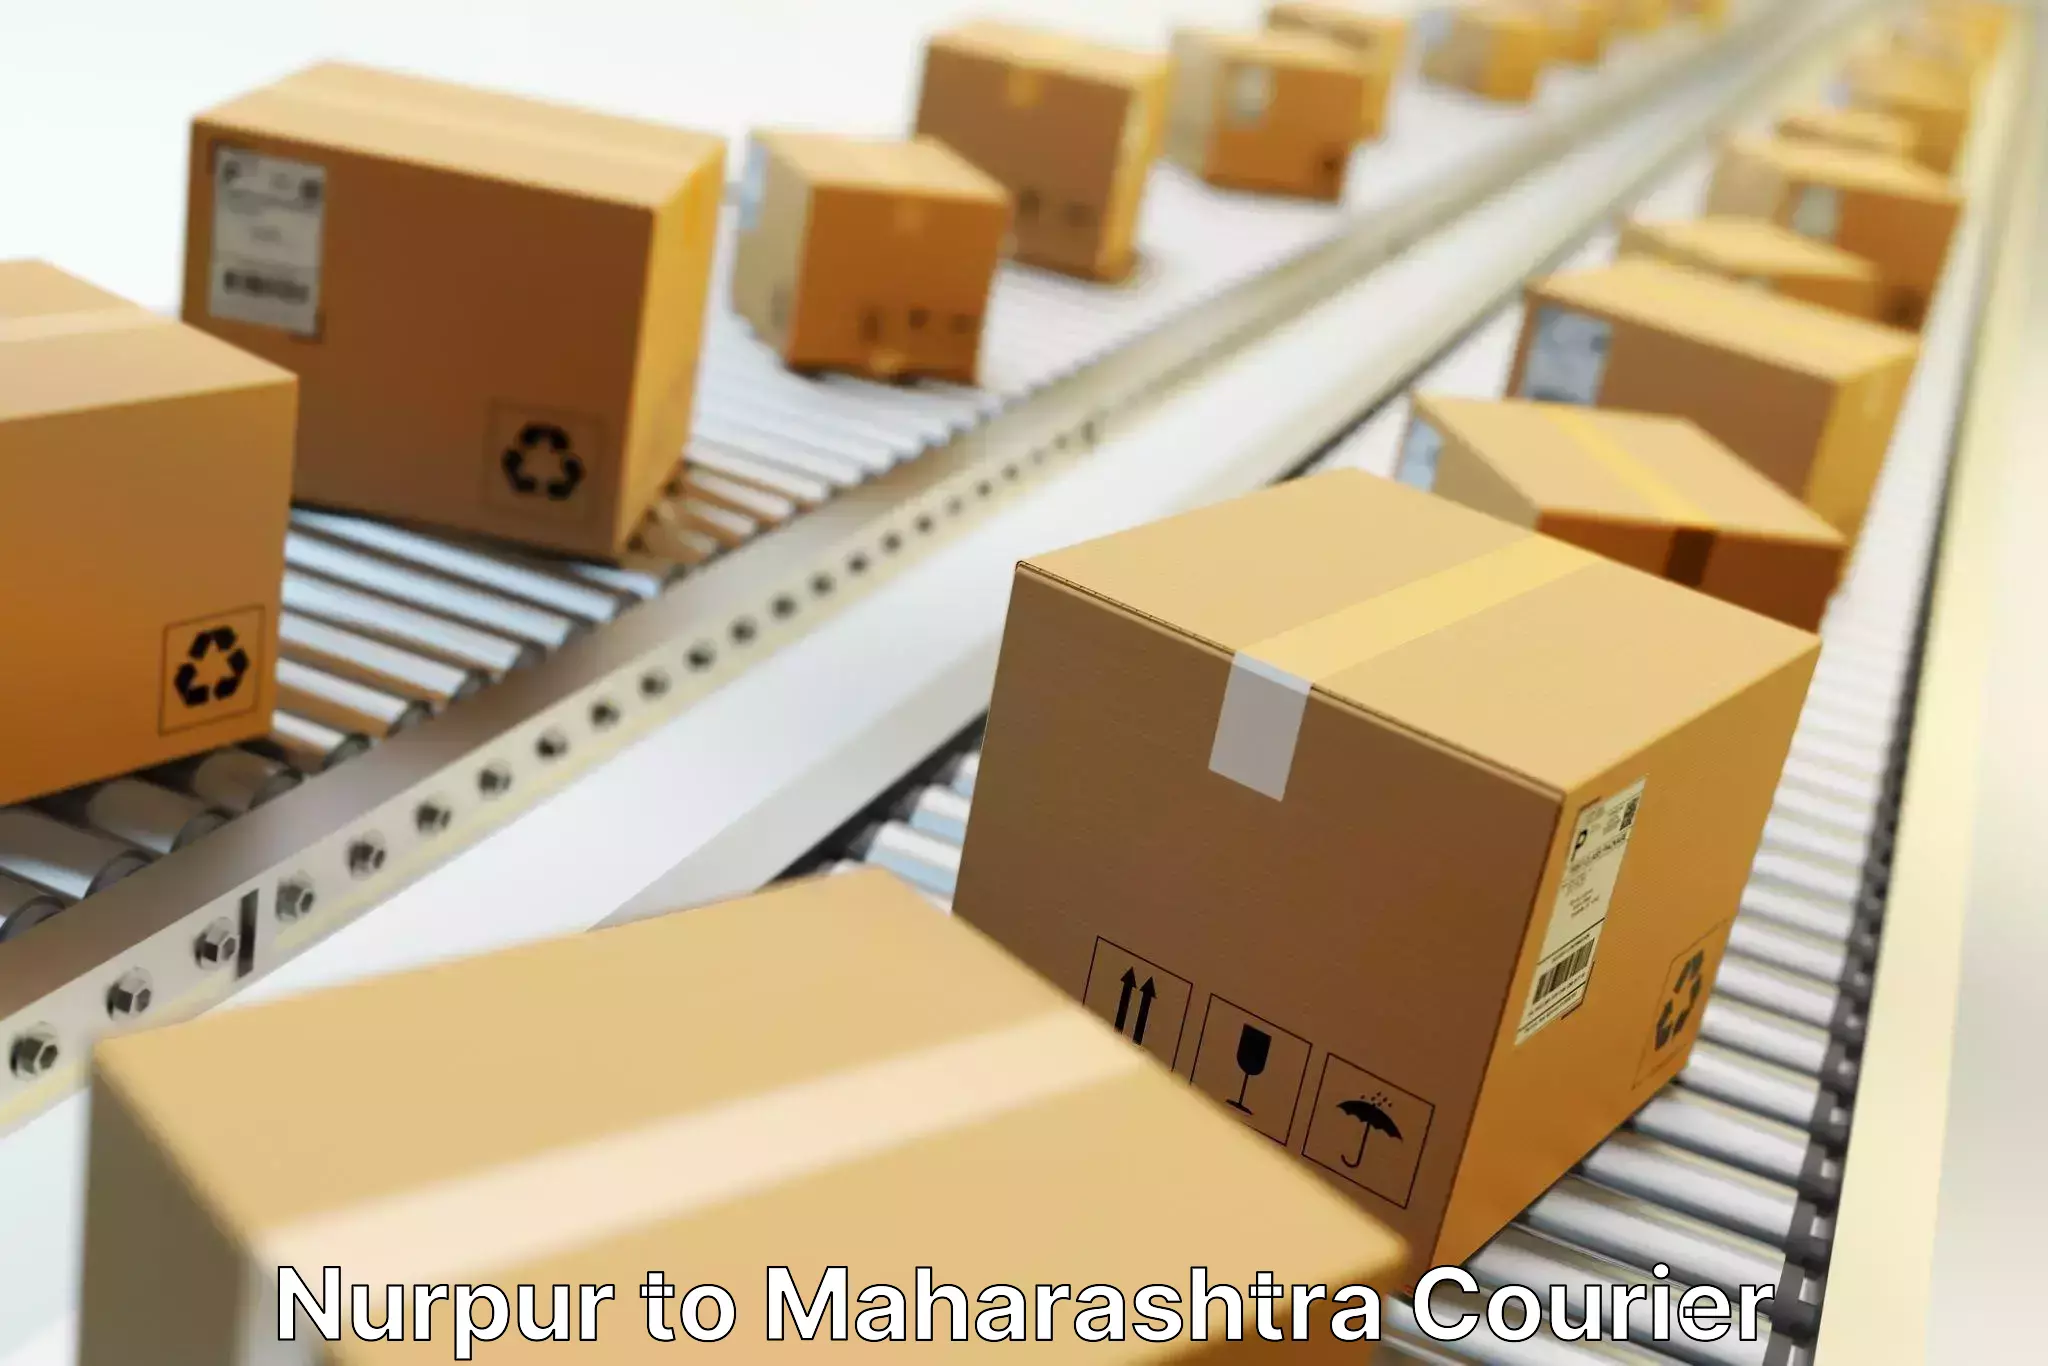 Fast shipping solutions Nurpur to Panvel